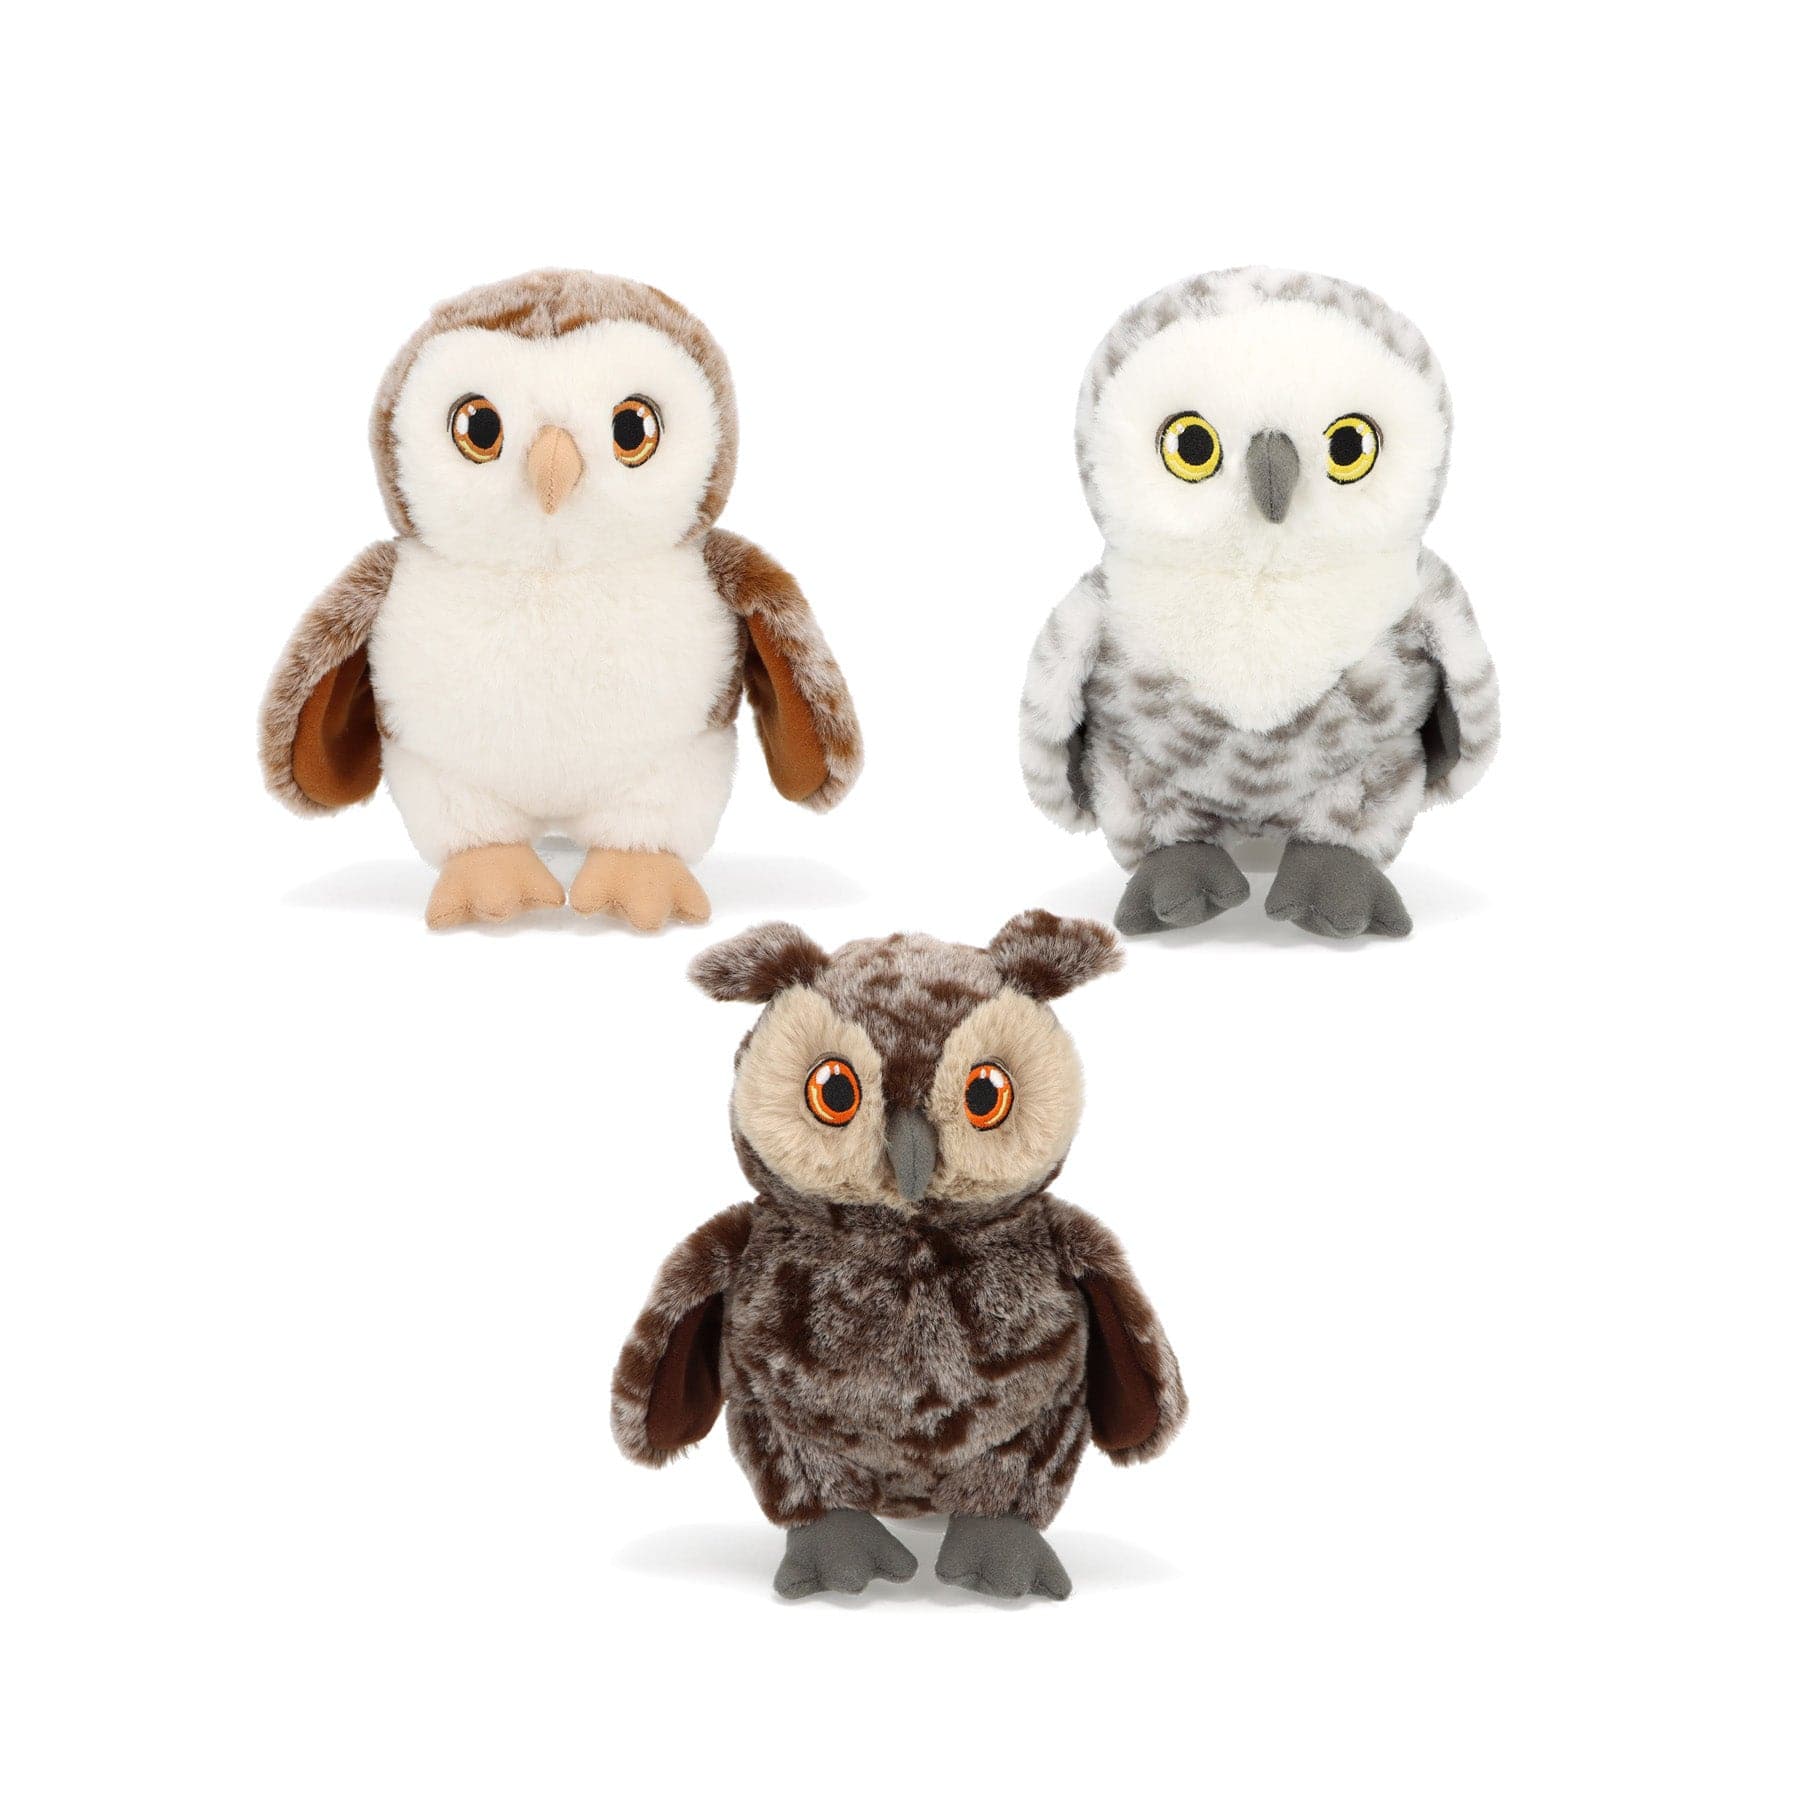 Plush owl toys trio, cute stuffed animal collection, white and brown soft toy owls with big eyes, children's cuddly plushies, isolated on white background.